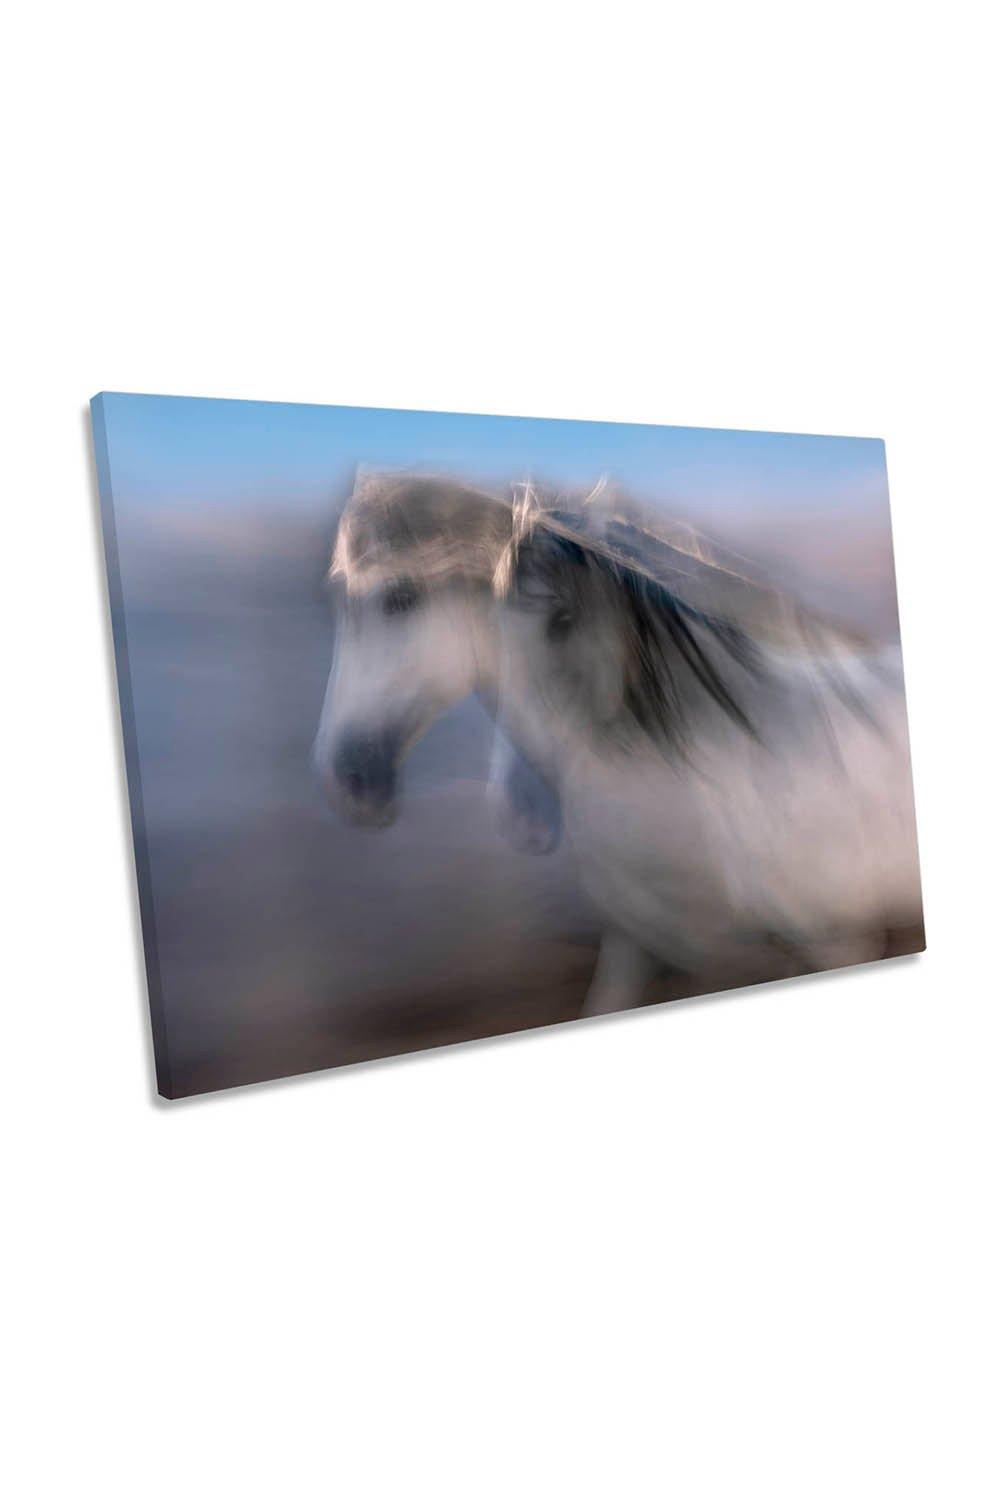 The Weather Coloured Horse Abstract Canvas Wall Art Picture Print